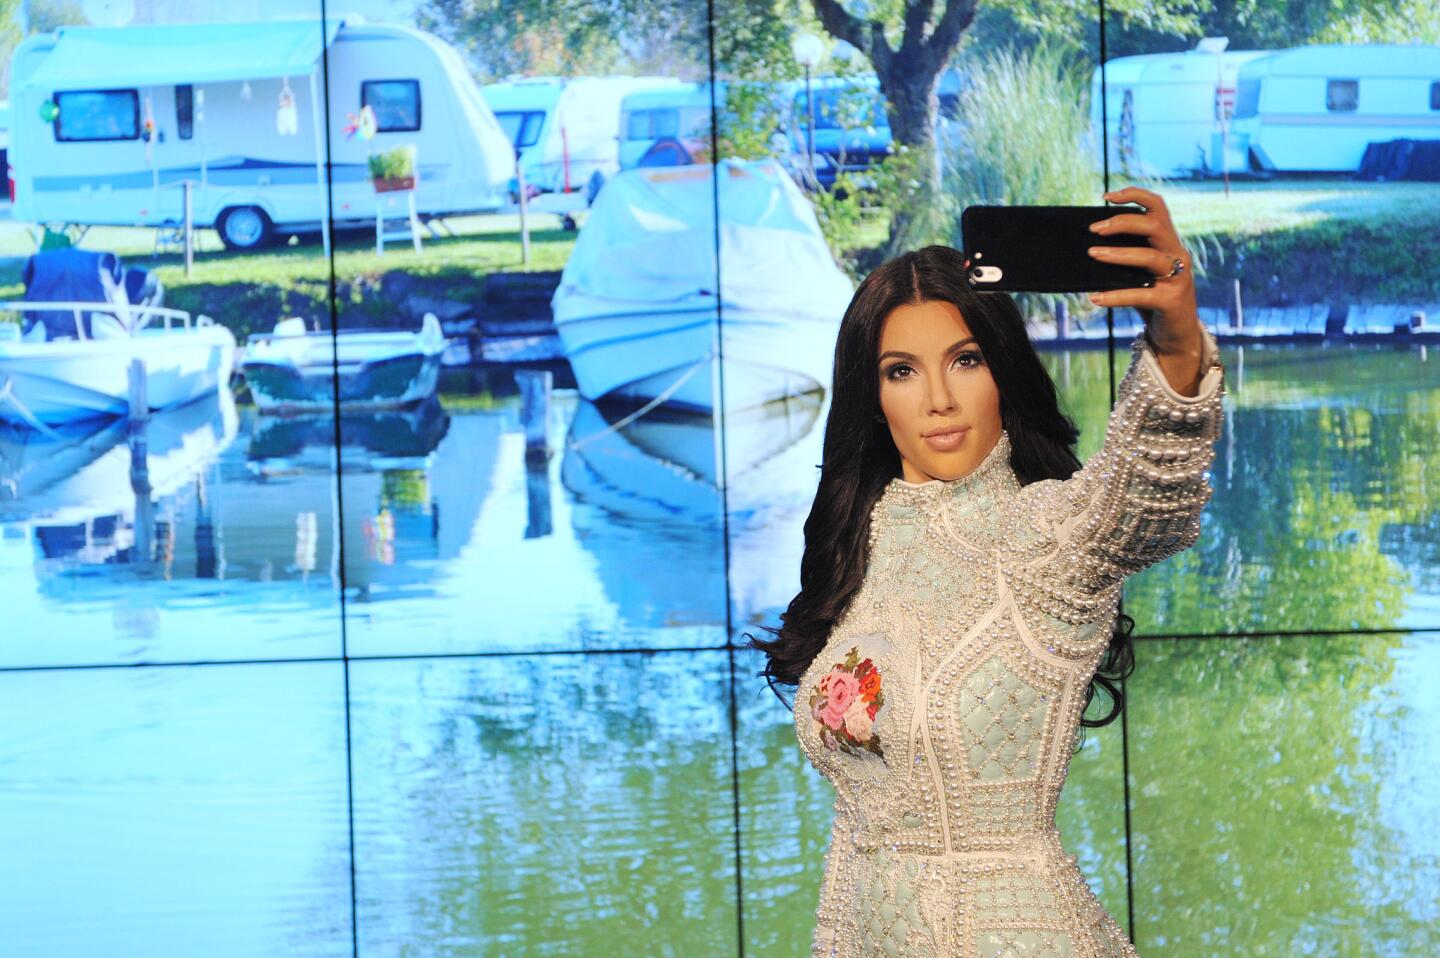 This counts, right? To commemorate Kim Kardashian's love of the selfie, Madame Tussauds in London unveiled a new wax figure of the reality star taking selfies against an ever-changing backdrop of different locations.